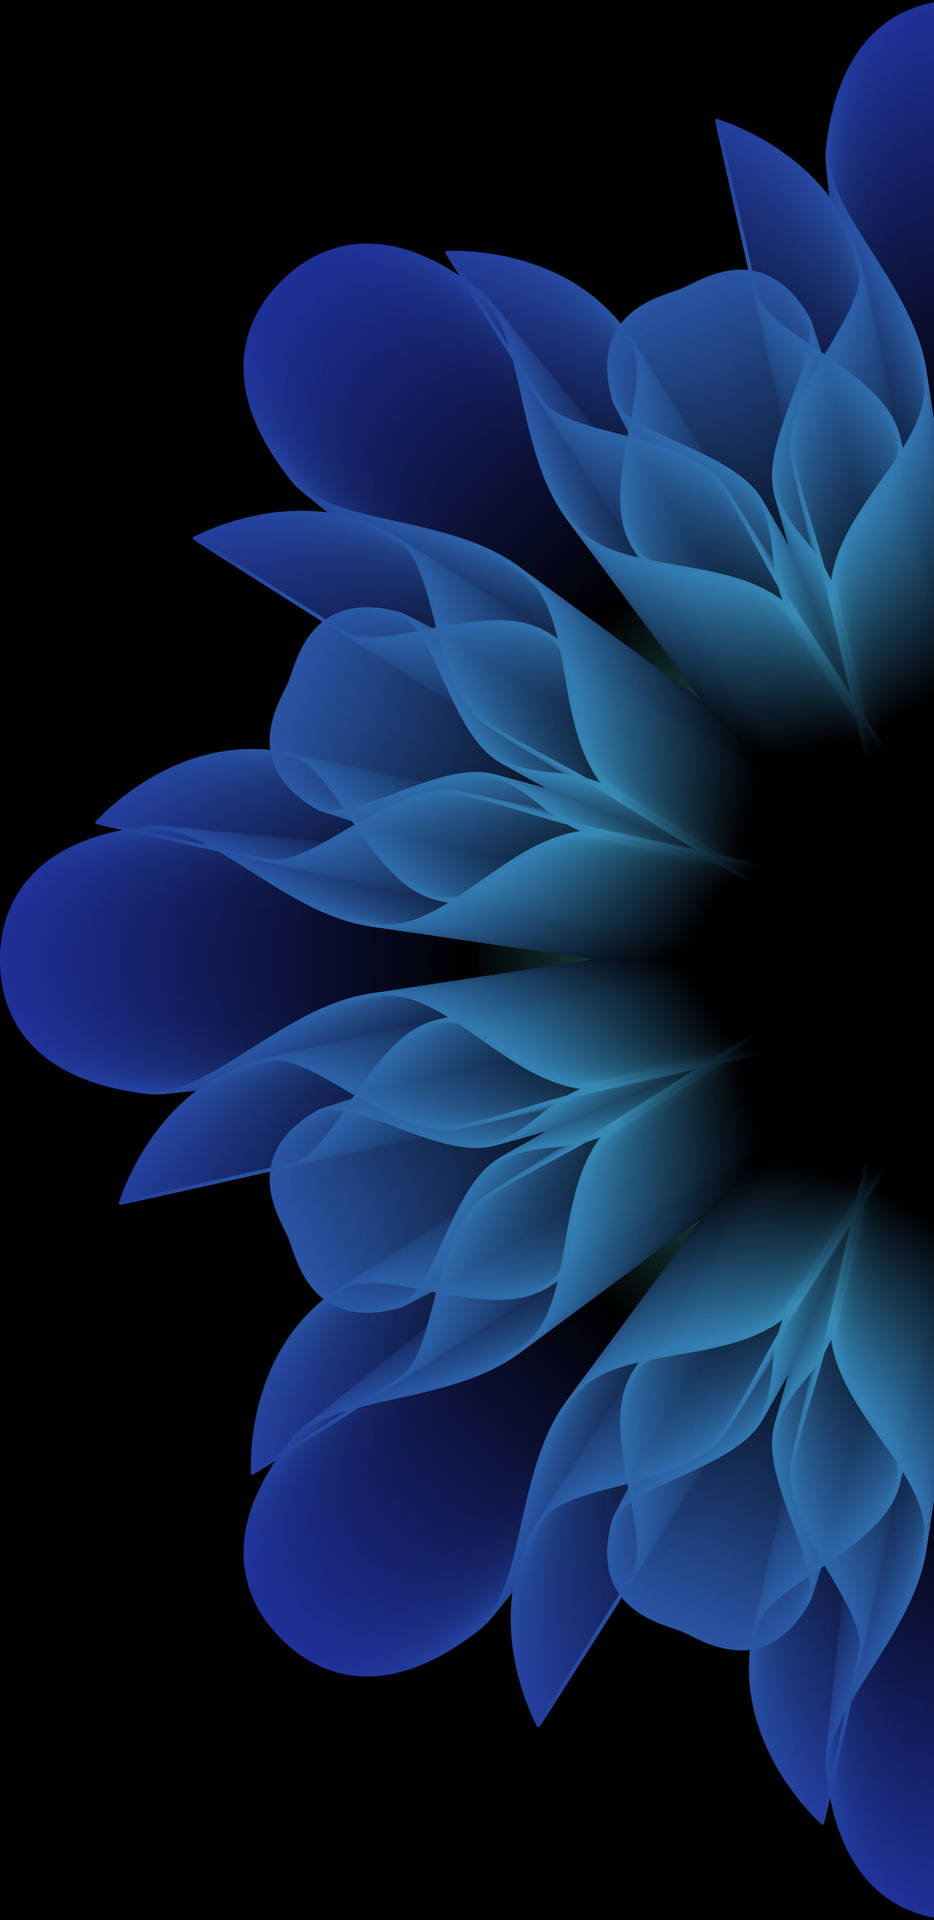 Iphone Xr Red Neon Blue Flower Background